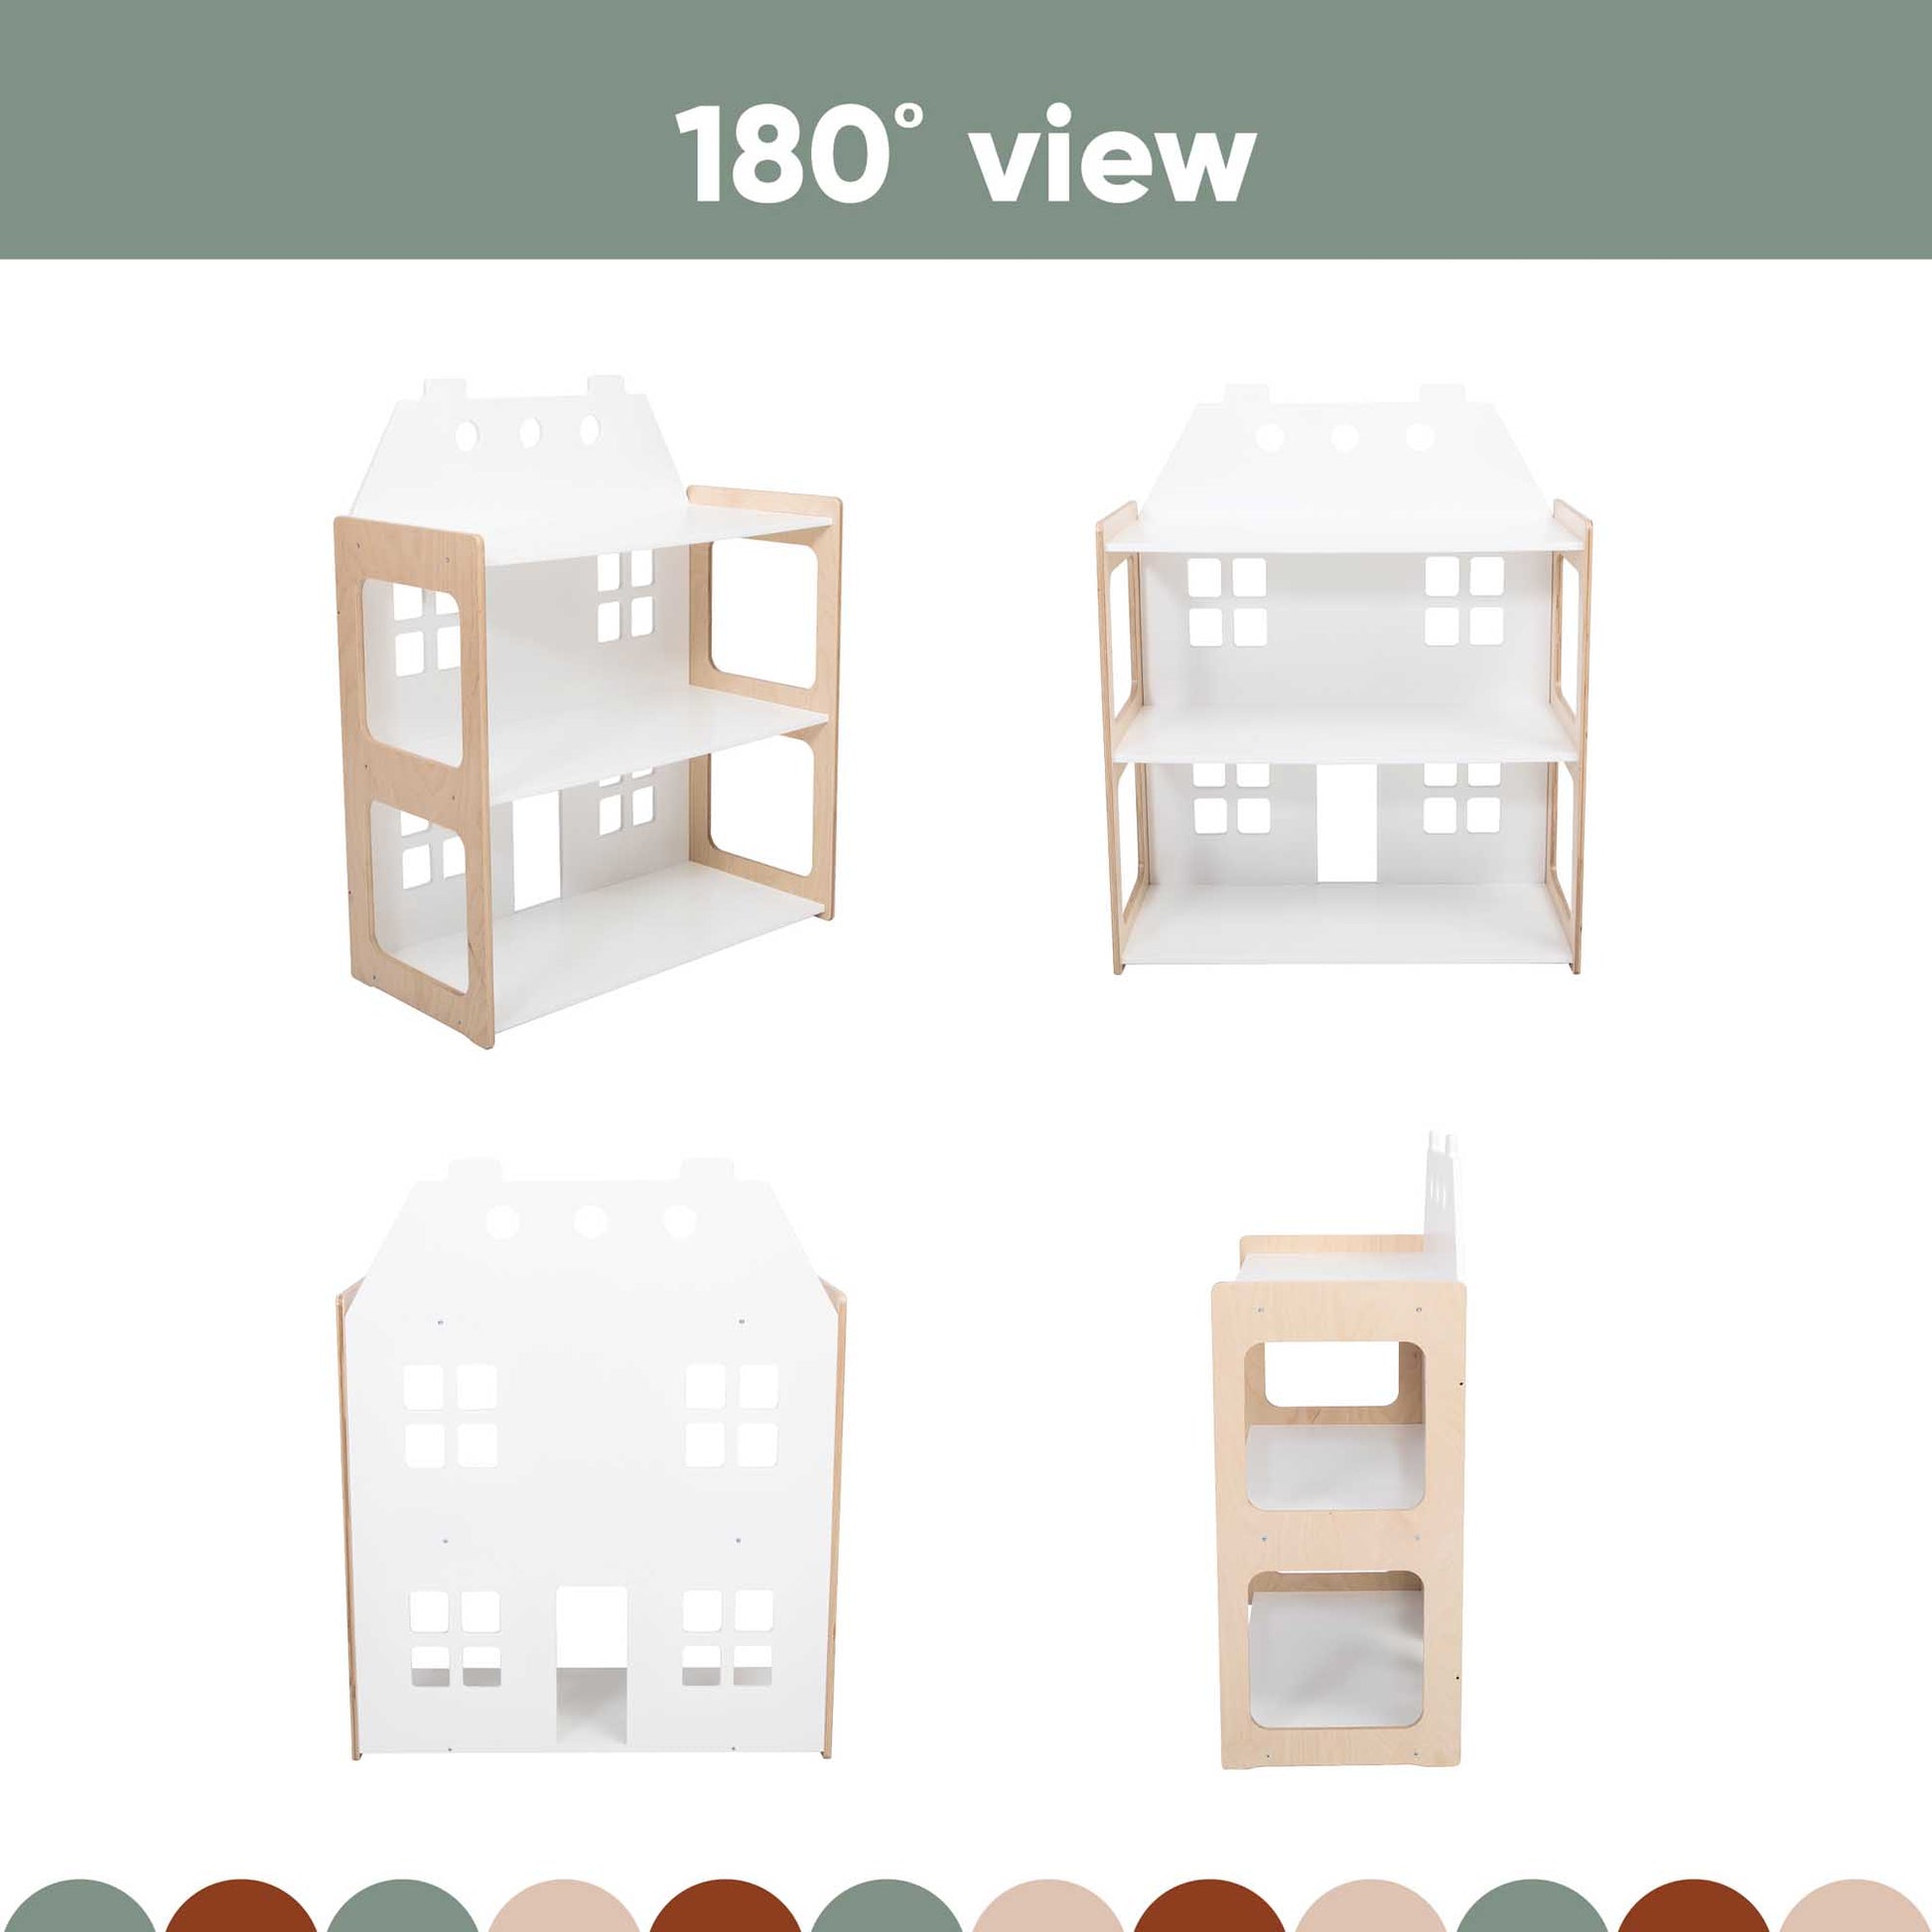 Four sides of a 2-in-1 doll house and shelf, perfect for open toy storage or as a doll house.